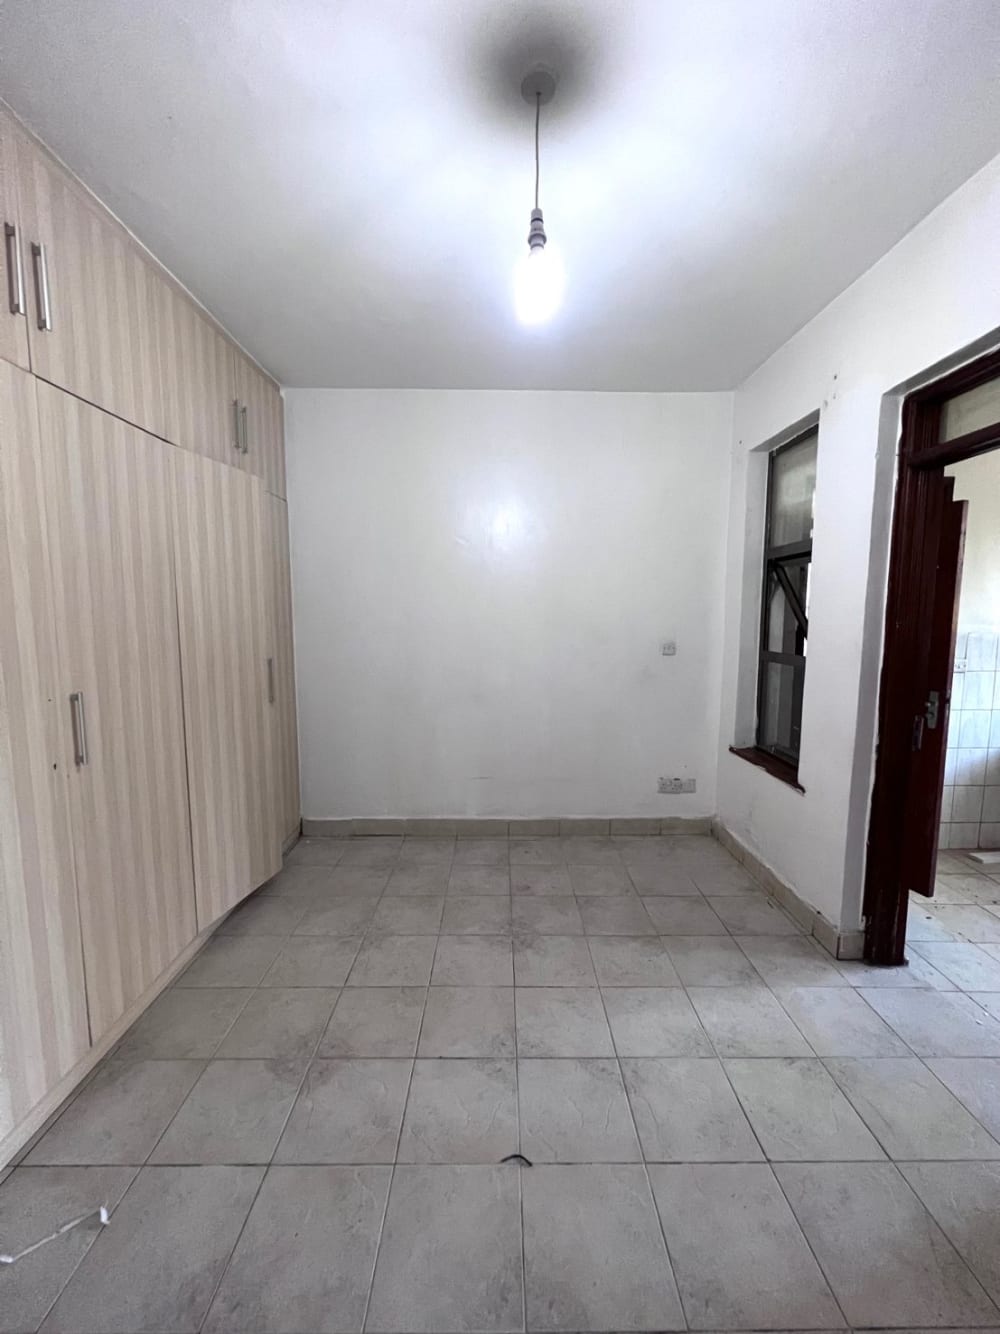 1 bedroom Apartment for rent in Kilimani